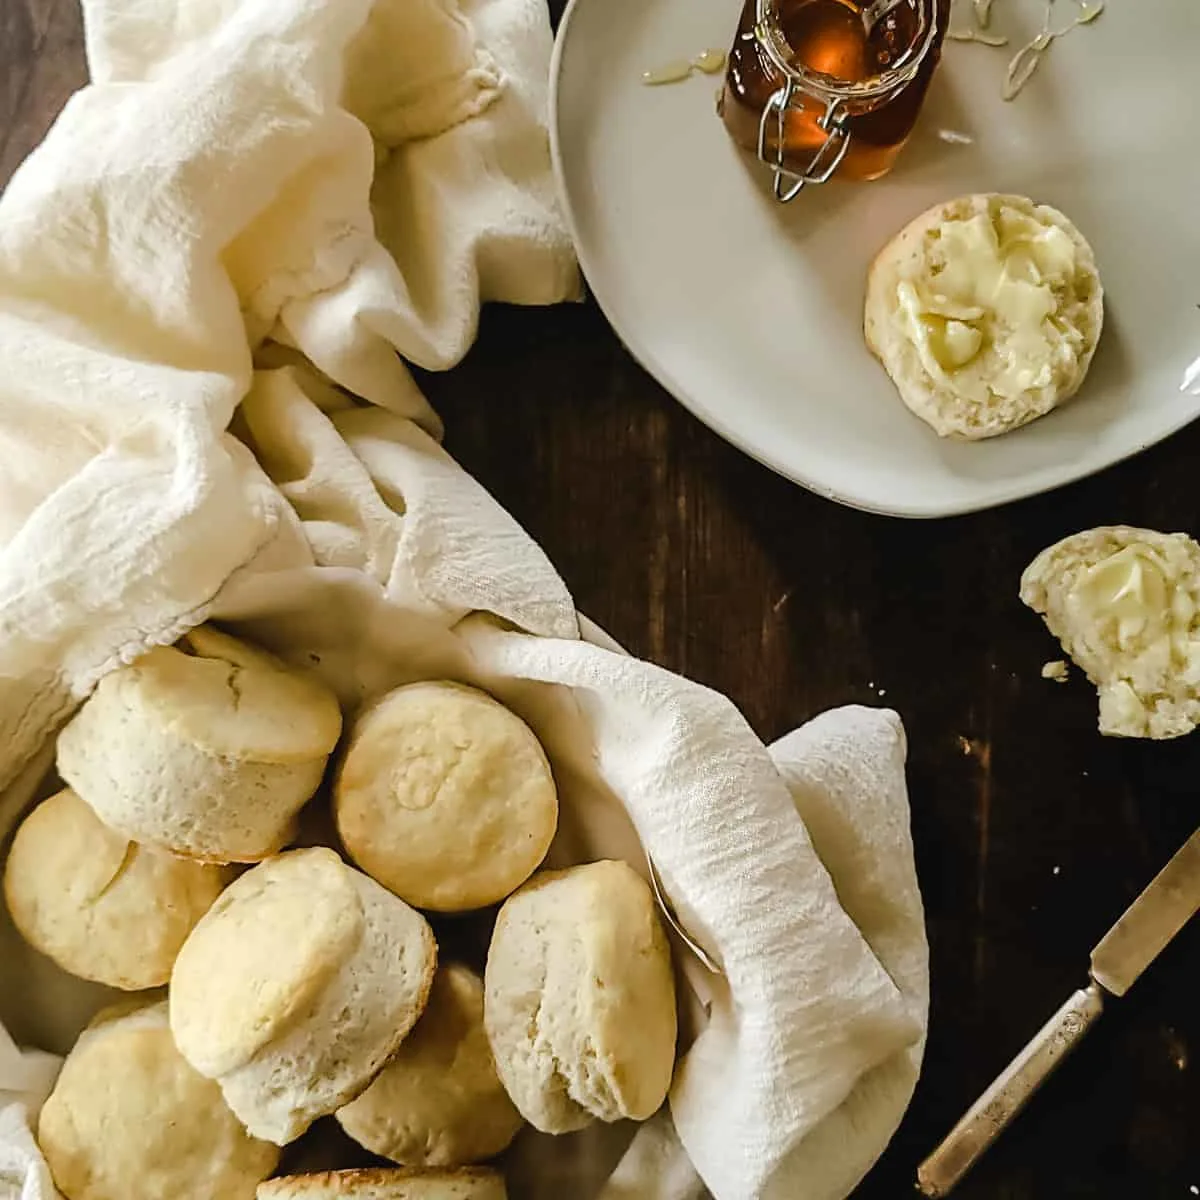 A basket of biscuits with butter and honey.